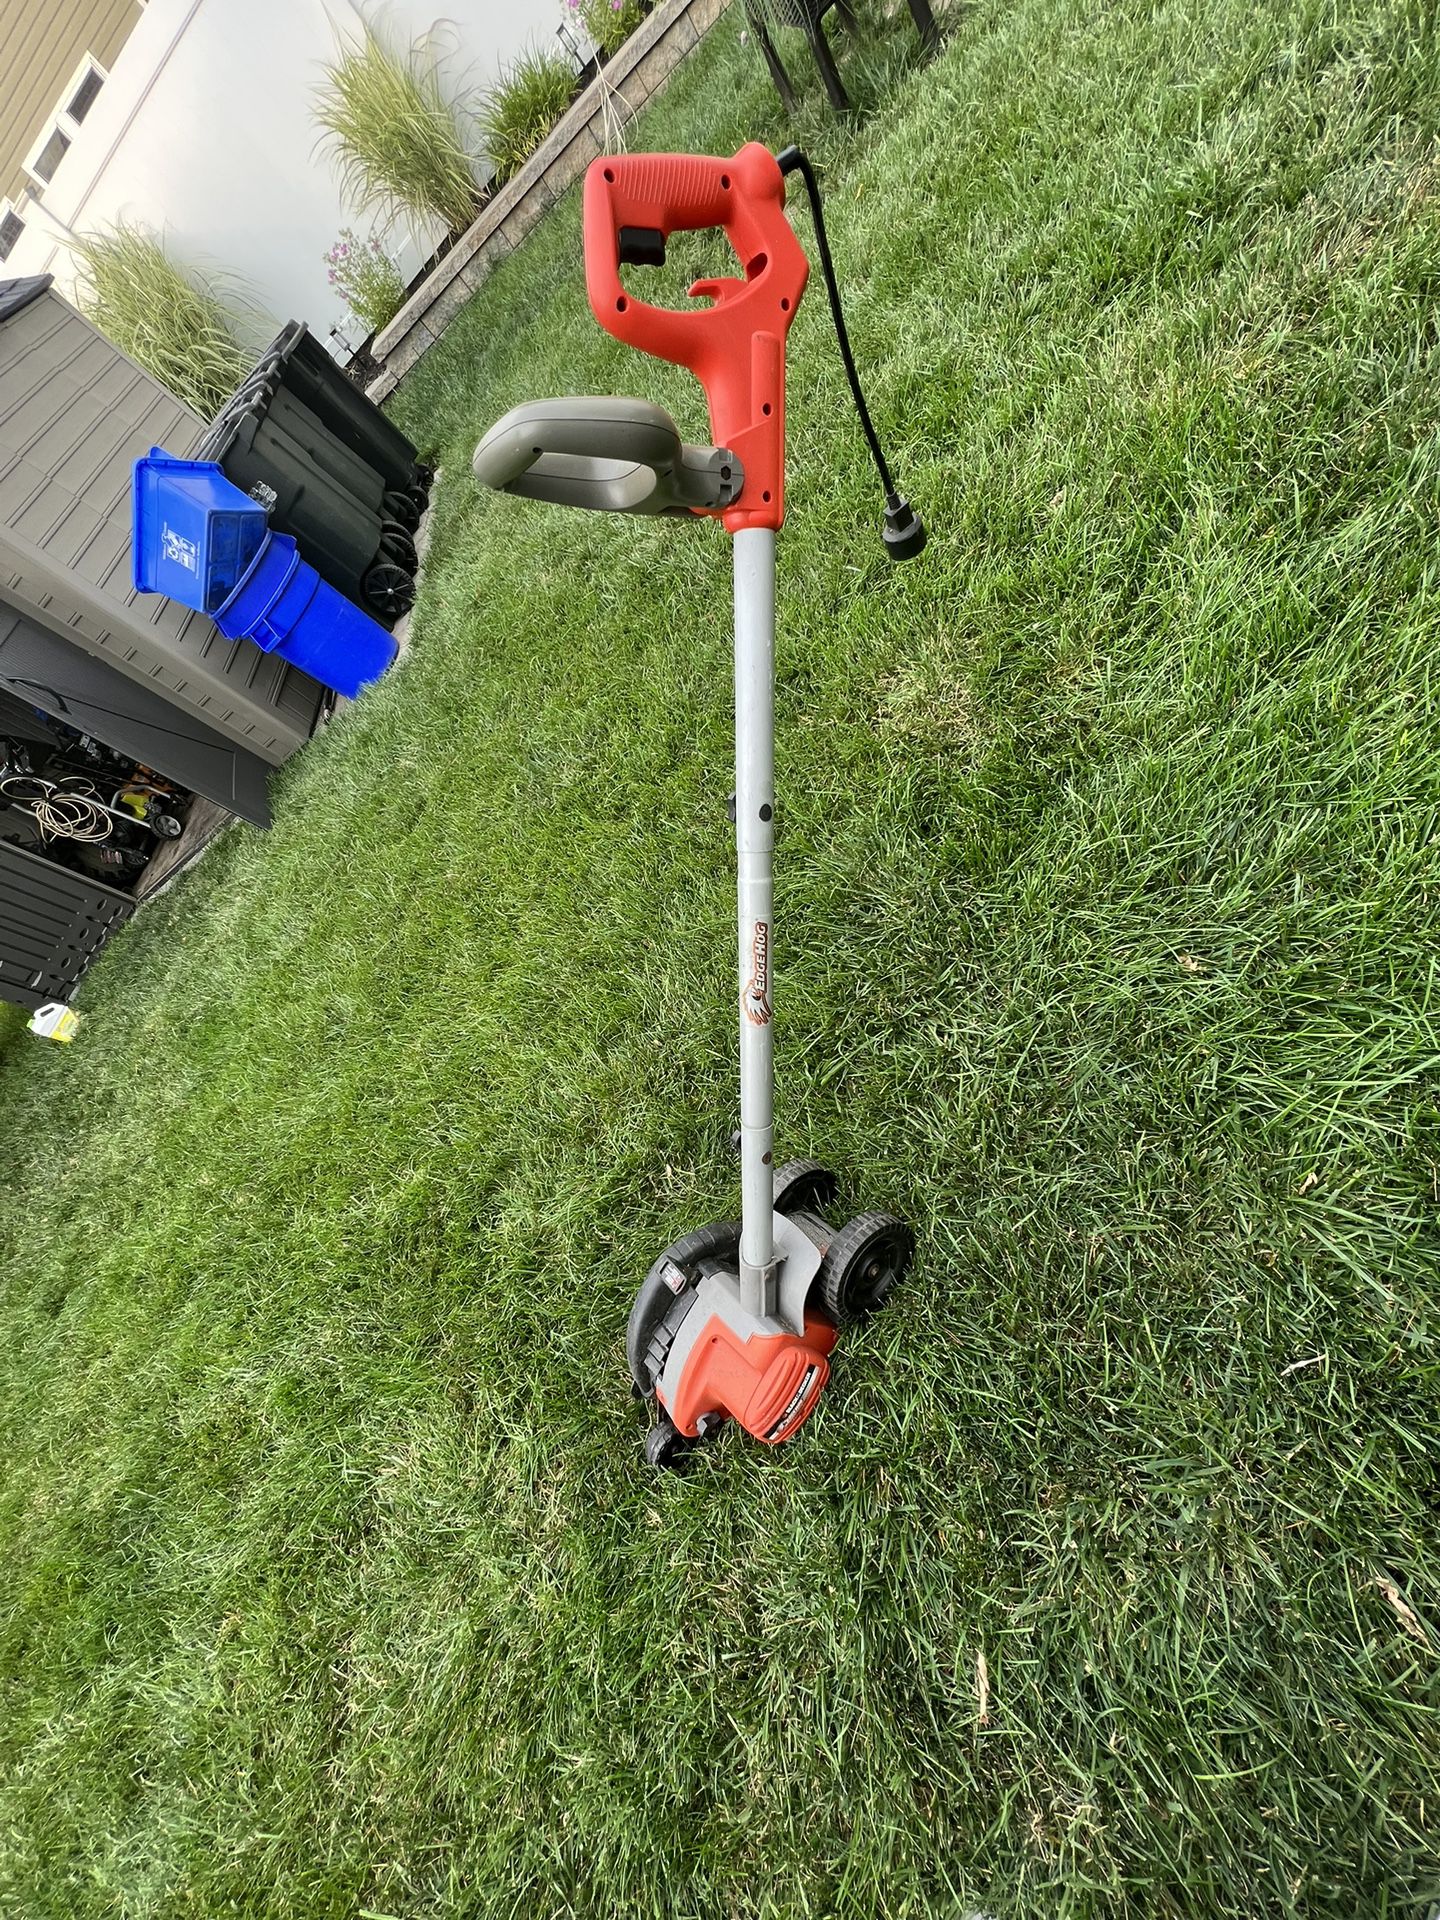 Used Black & Decker Electric Edger Edge Hog for Sale in Maple Shade  Township, NJ - OfferUp